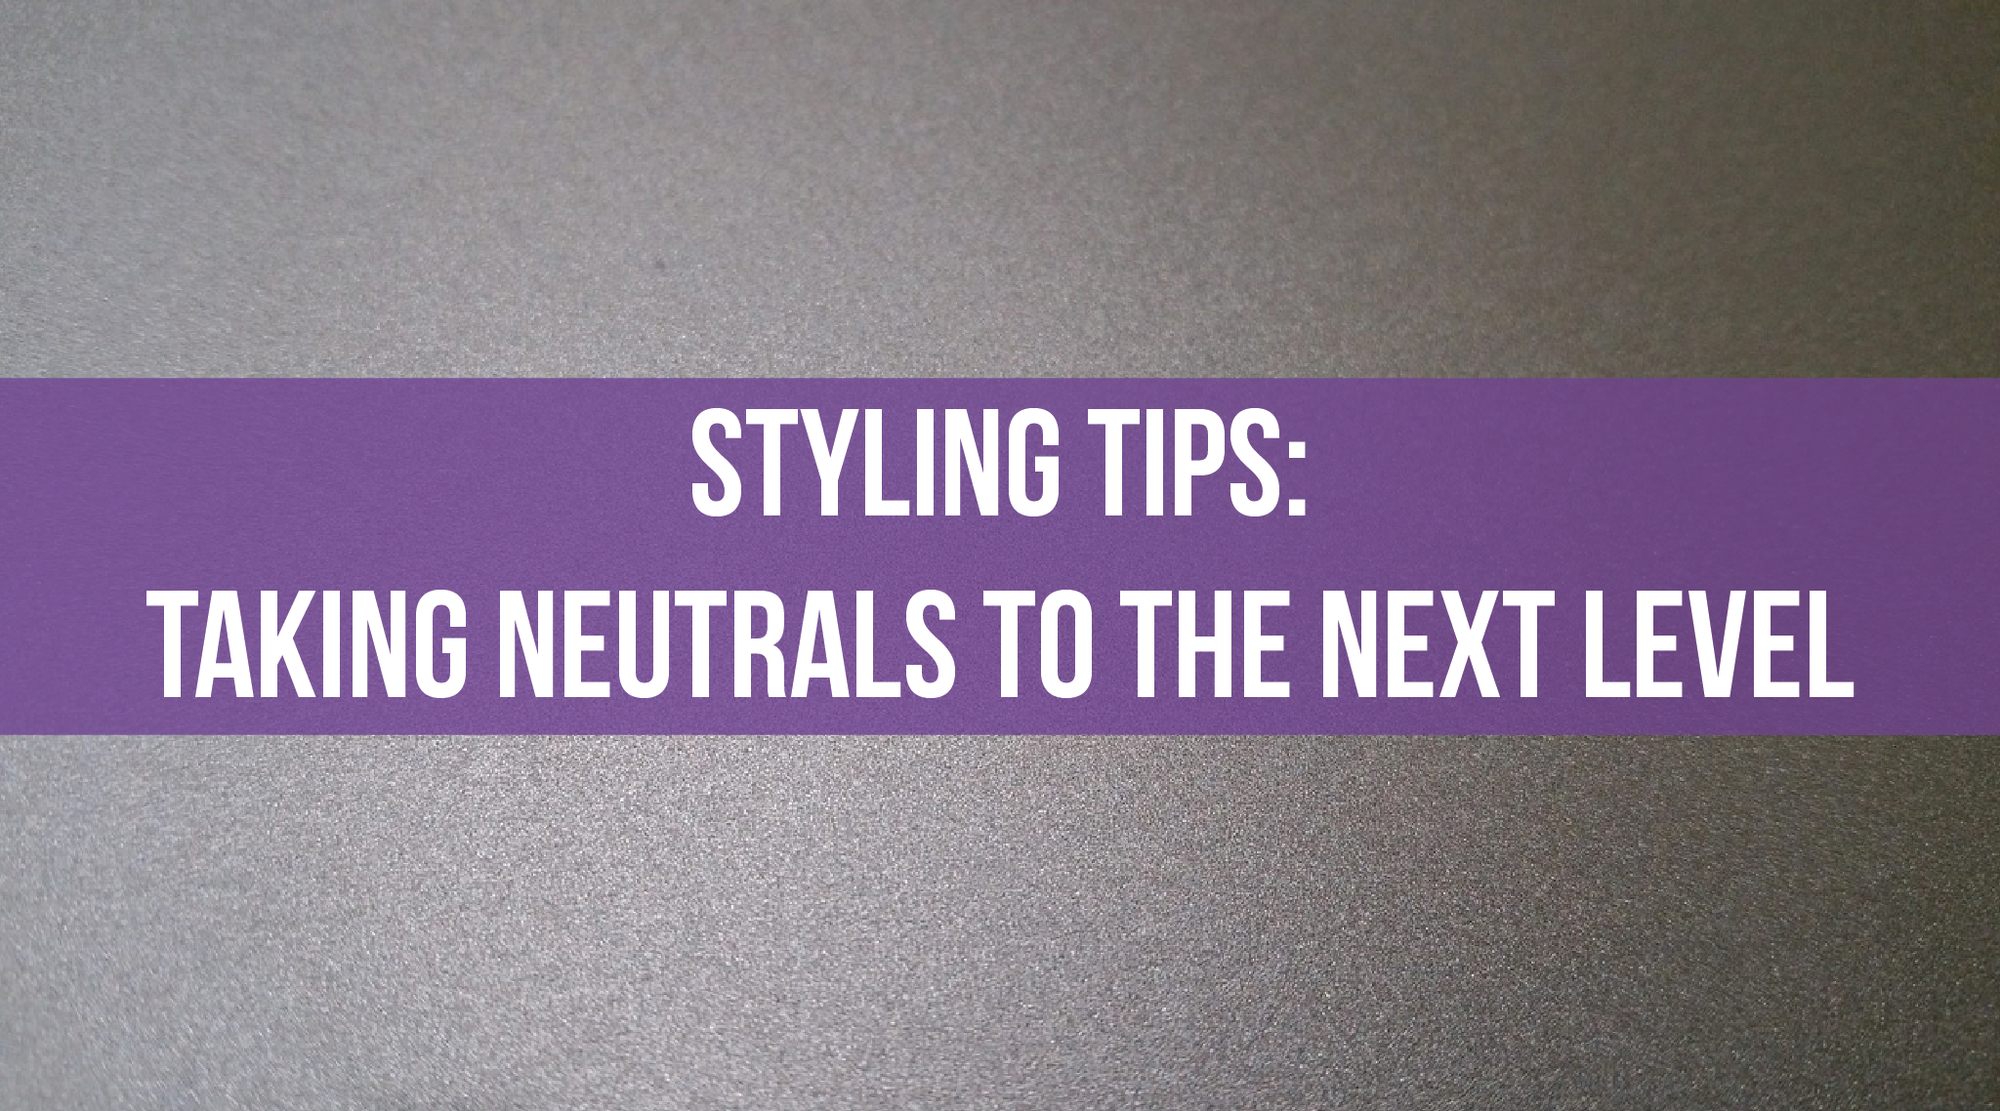 Styling Tips: Taking Neutrals to the Next Level